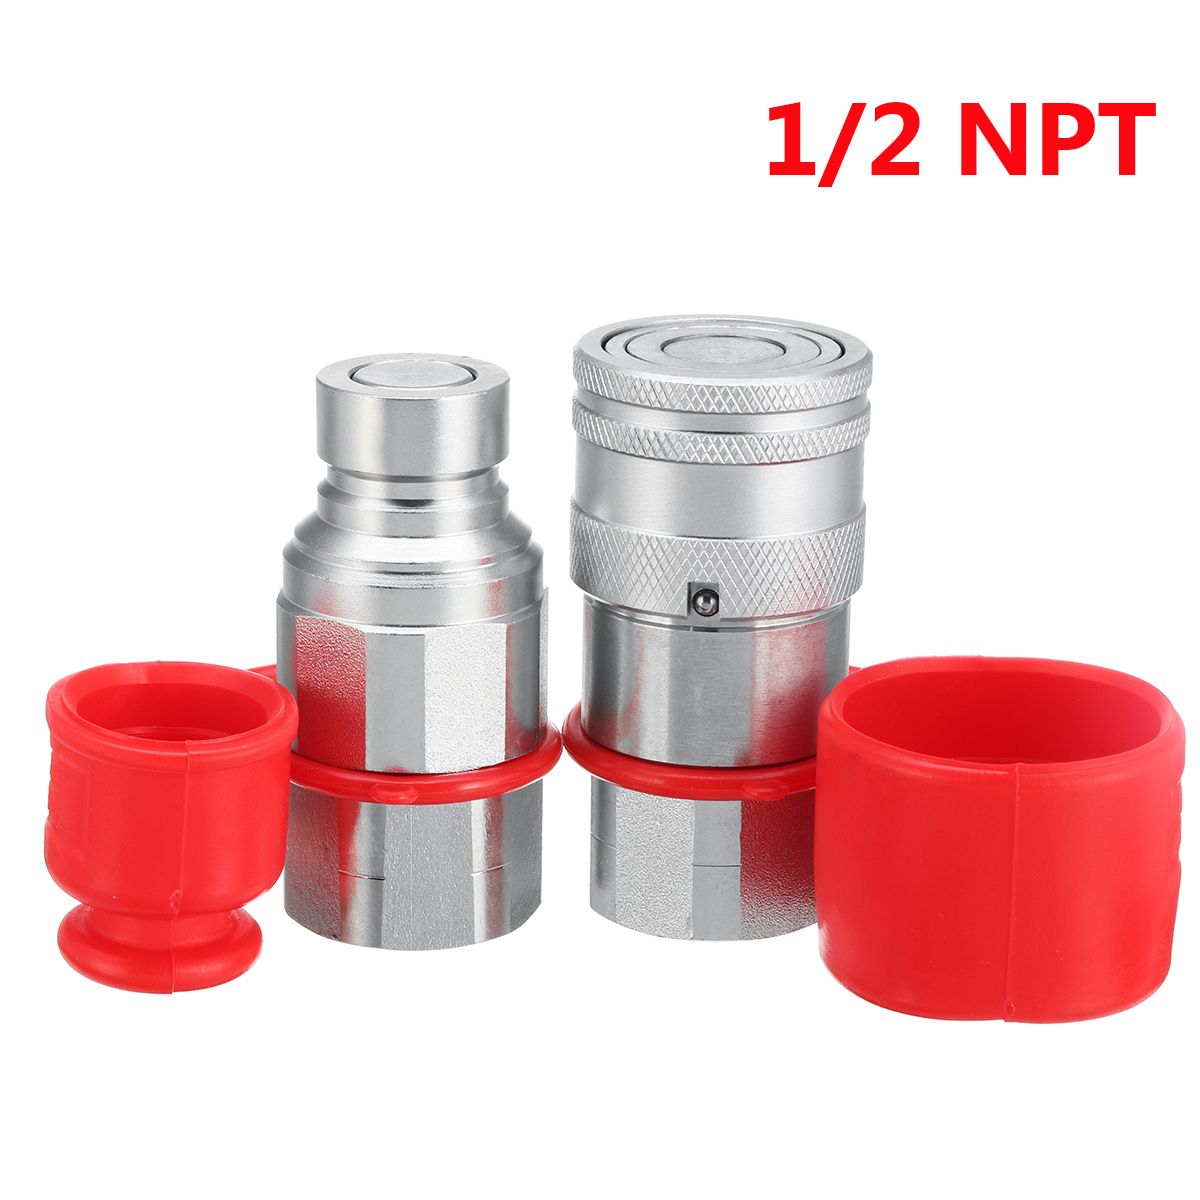 12quot-NPT-Skid-Steer-Bobcat-Flat-Face-Hydraulic-Quick-Connect-Adapter-Coupler-Coupling-Set-1383594